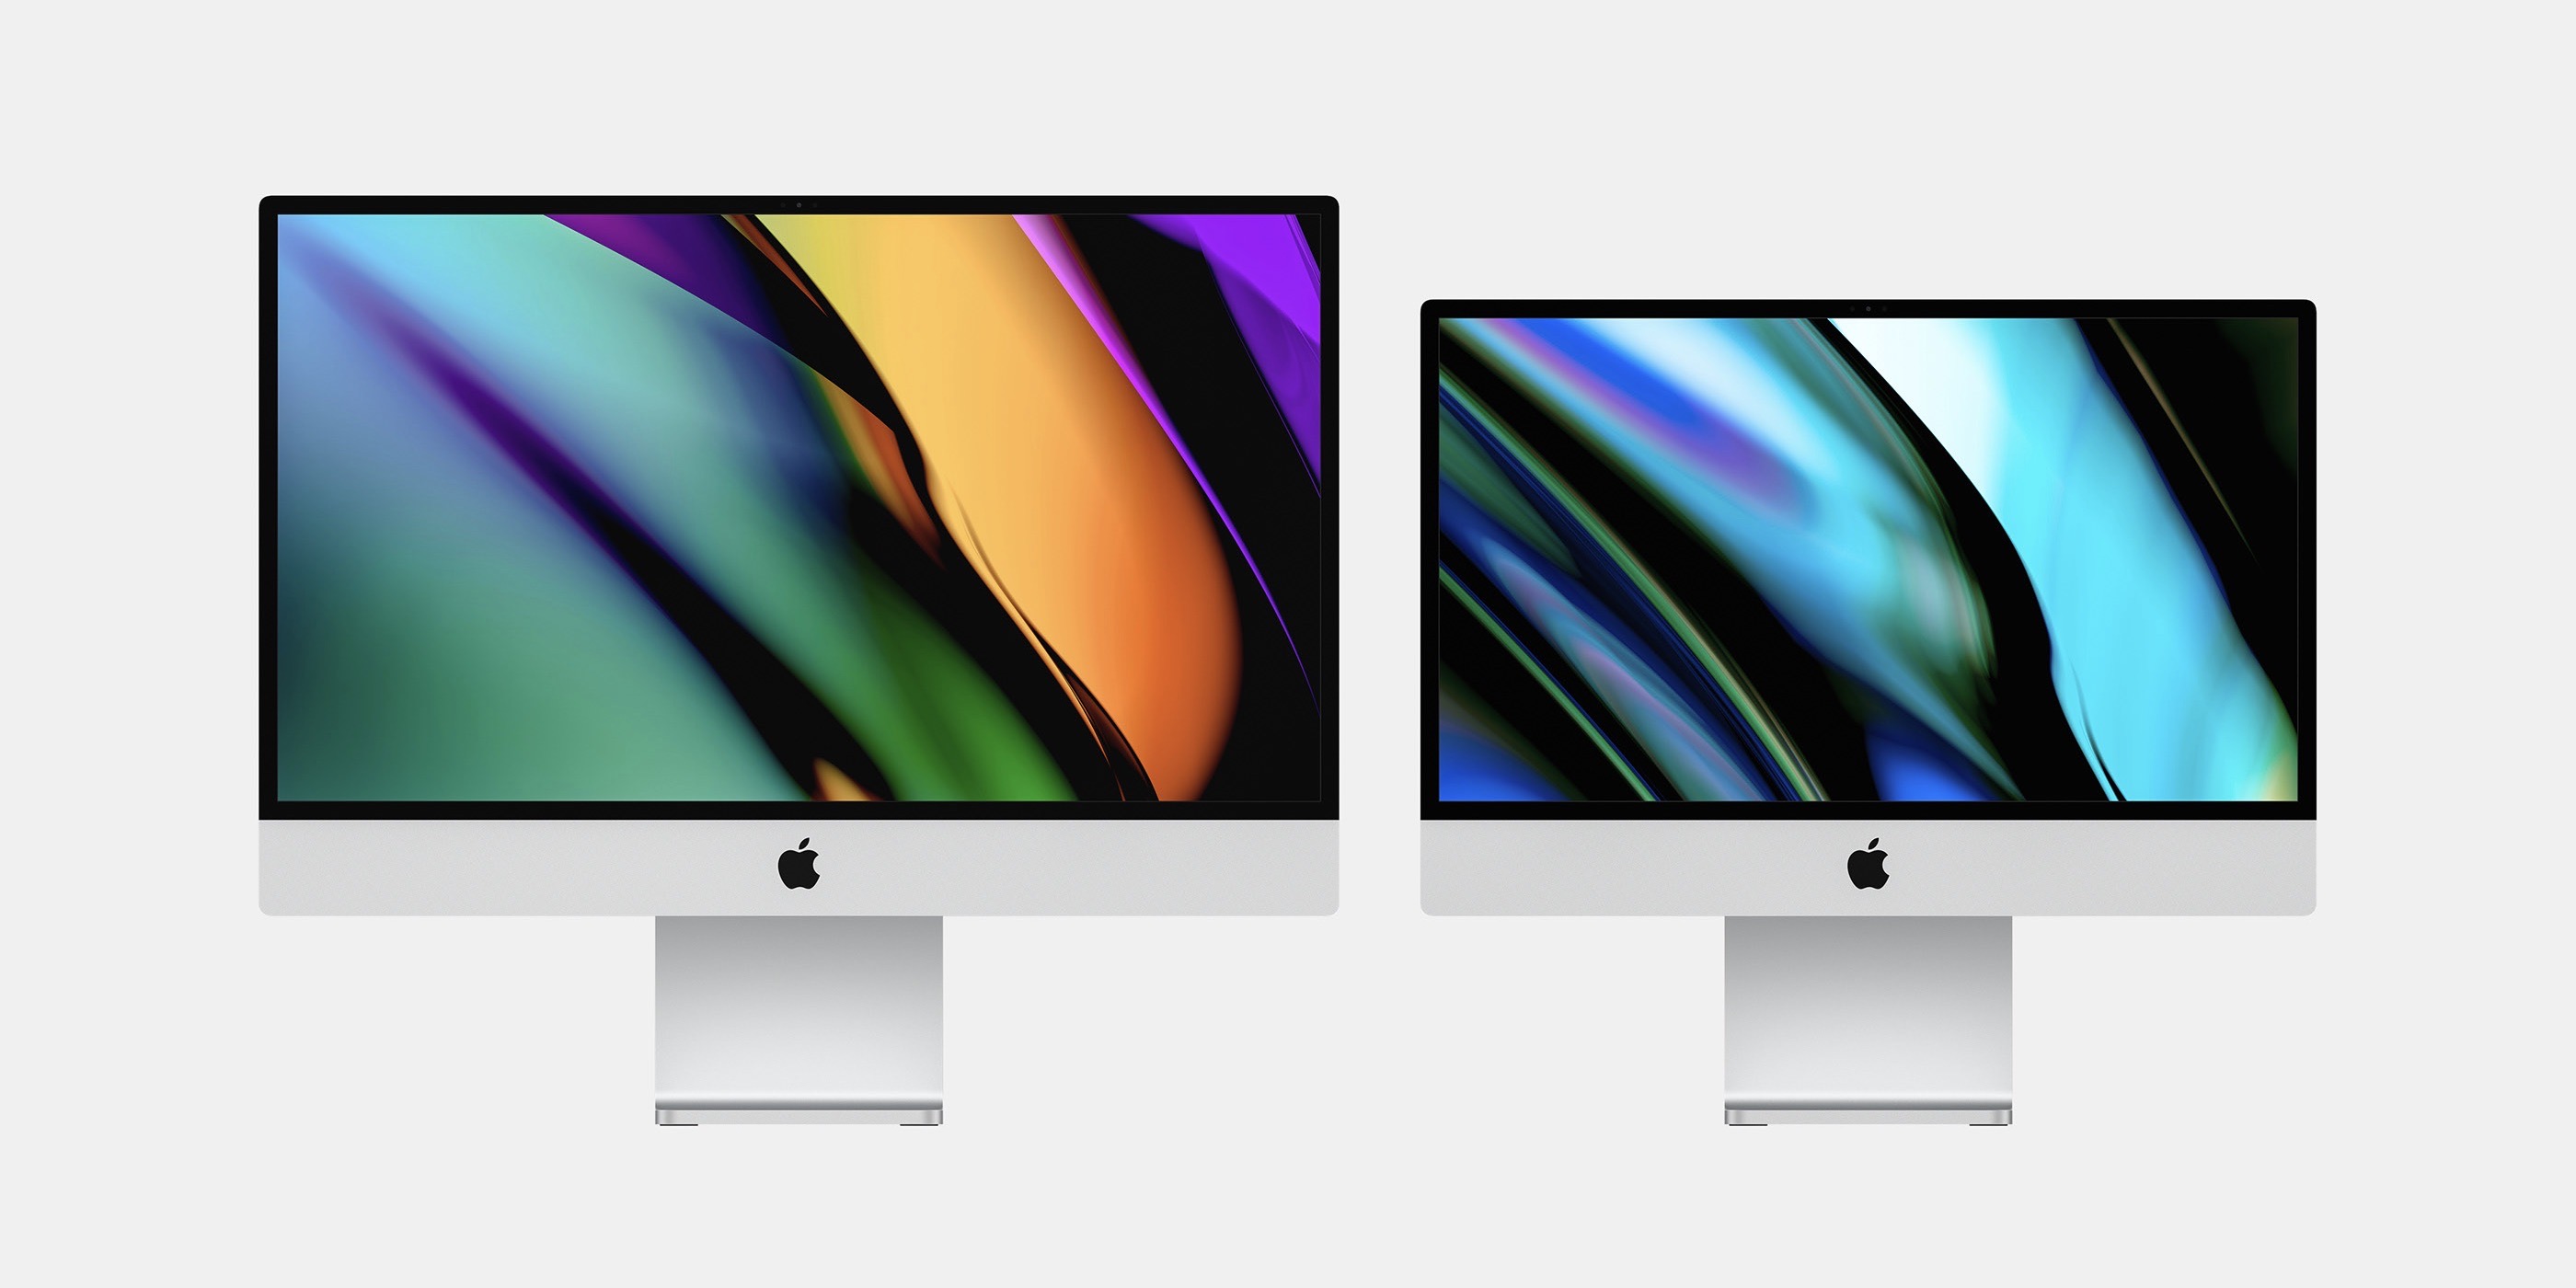 Orbitoare doc troleibuz  Don't expect a low-end larger iMac in the near future as Apple focuses on  new iMac Pro - 9to5Mac